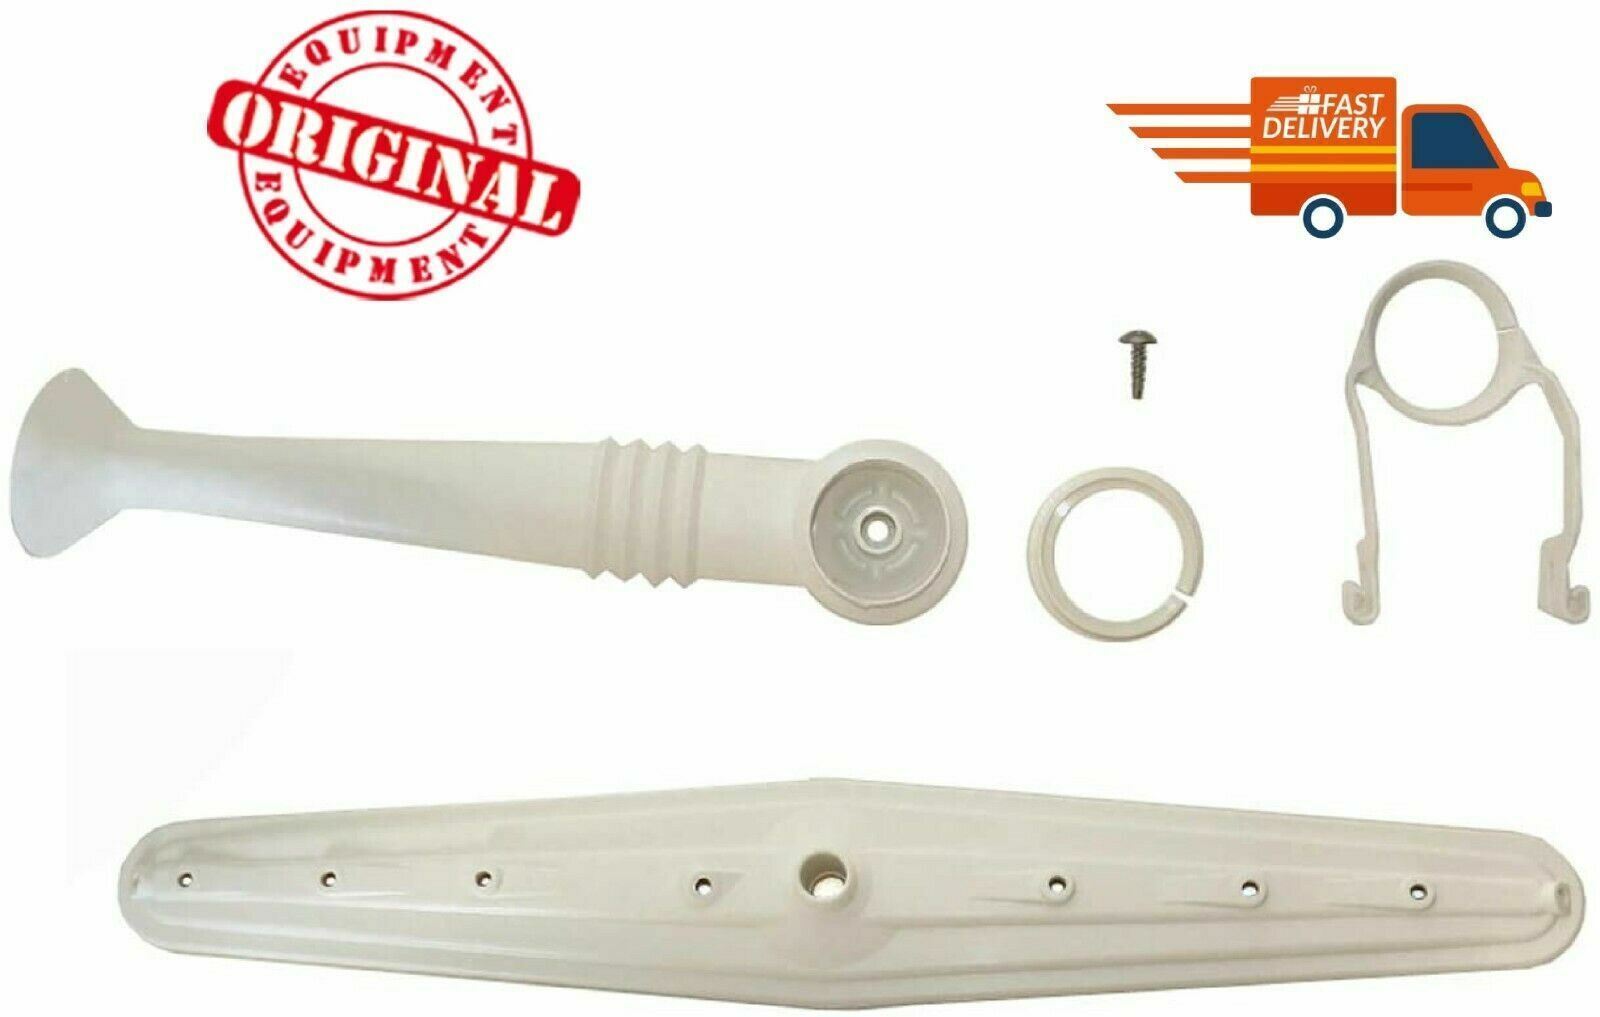 Genuine 675808 Whirlpool Dishwasher Middle Spray Arm And Supply Tube Kit